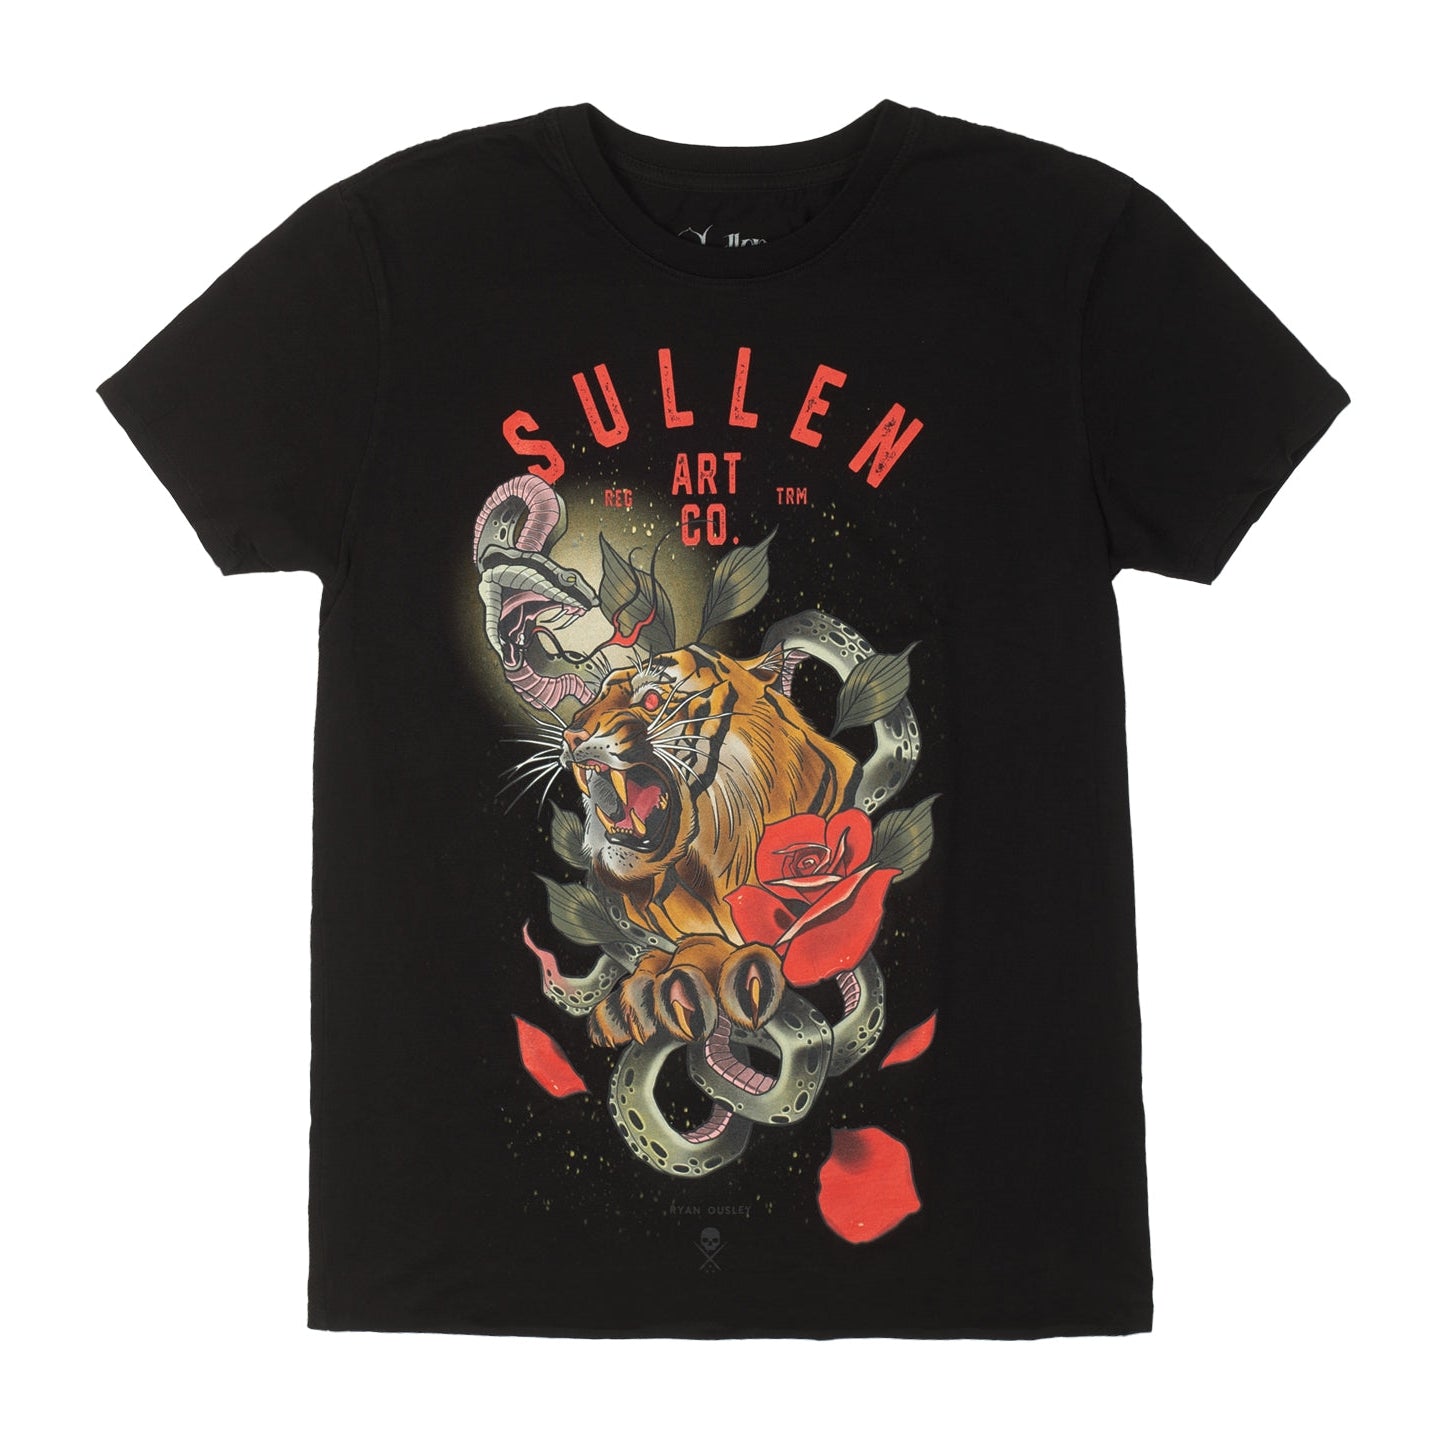 SULLEN ANGELS OUSLEY TIGER LADIES T-SHIRT